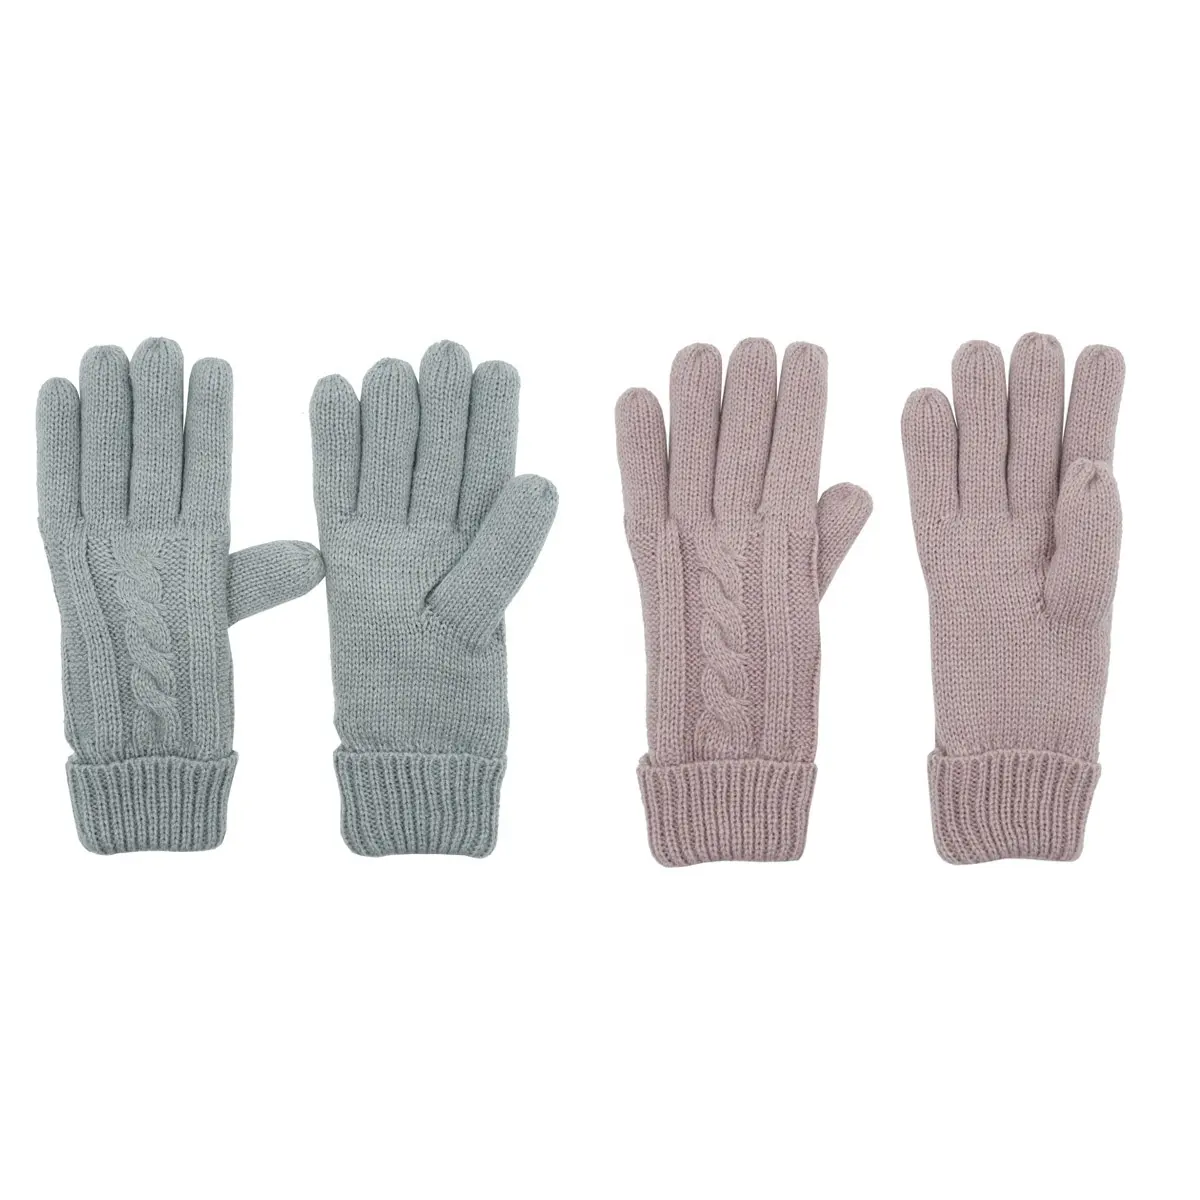 Winter Warm Thickening Mittens Women Knitted Soft Outdoor Cycling Casual Acrylic Gloves